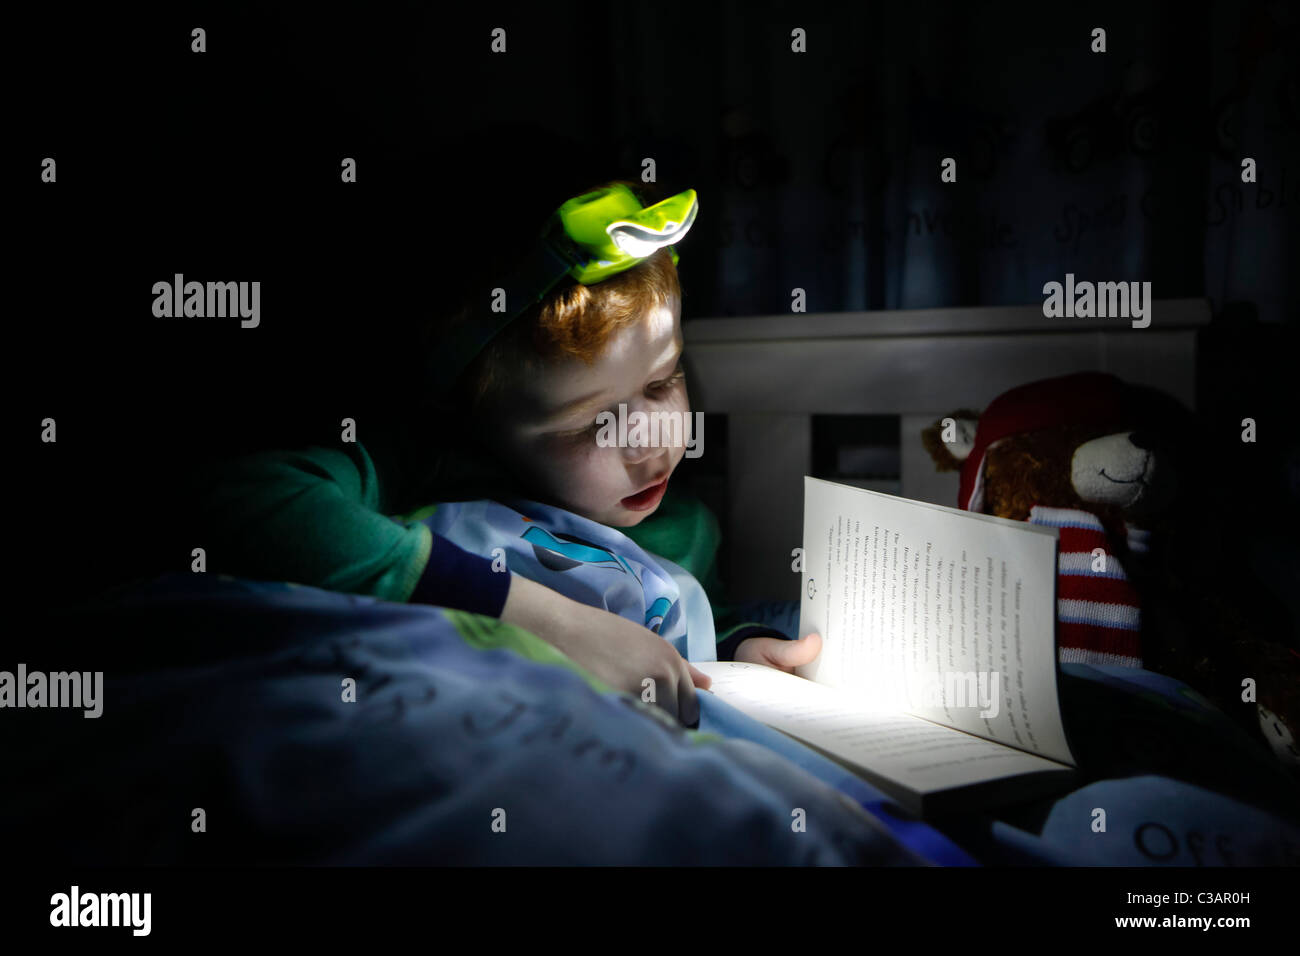 A seven year old boy reading a book in his bed using a head lamp Stock Photo